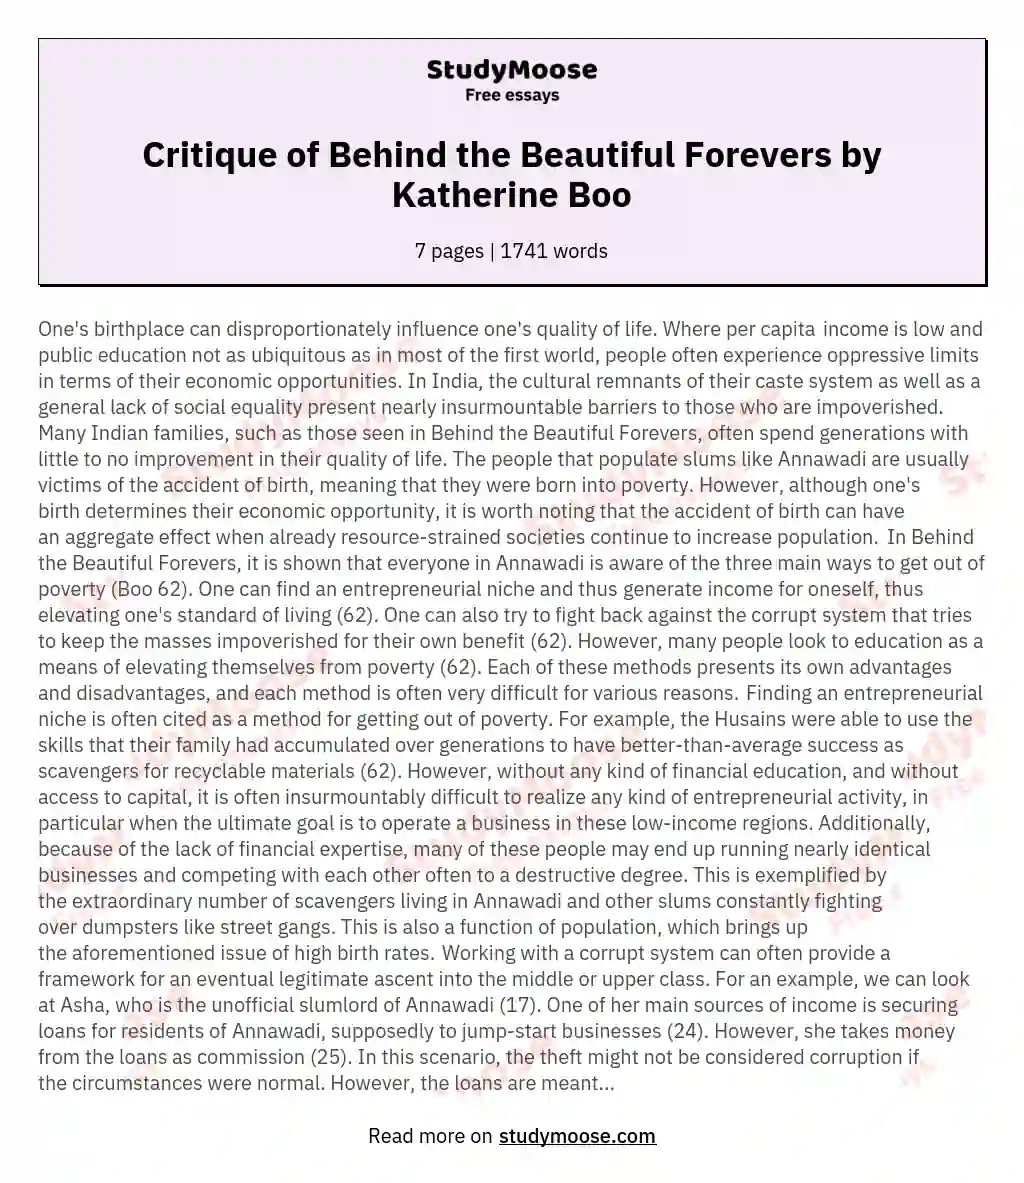 Critique of Behind the Beautiful Forevers by Katherine Boo essay